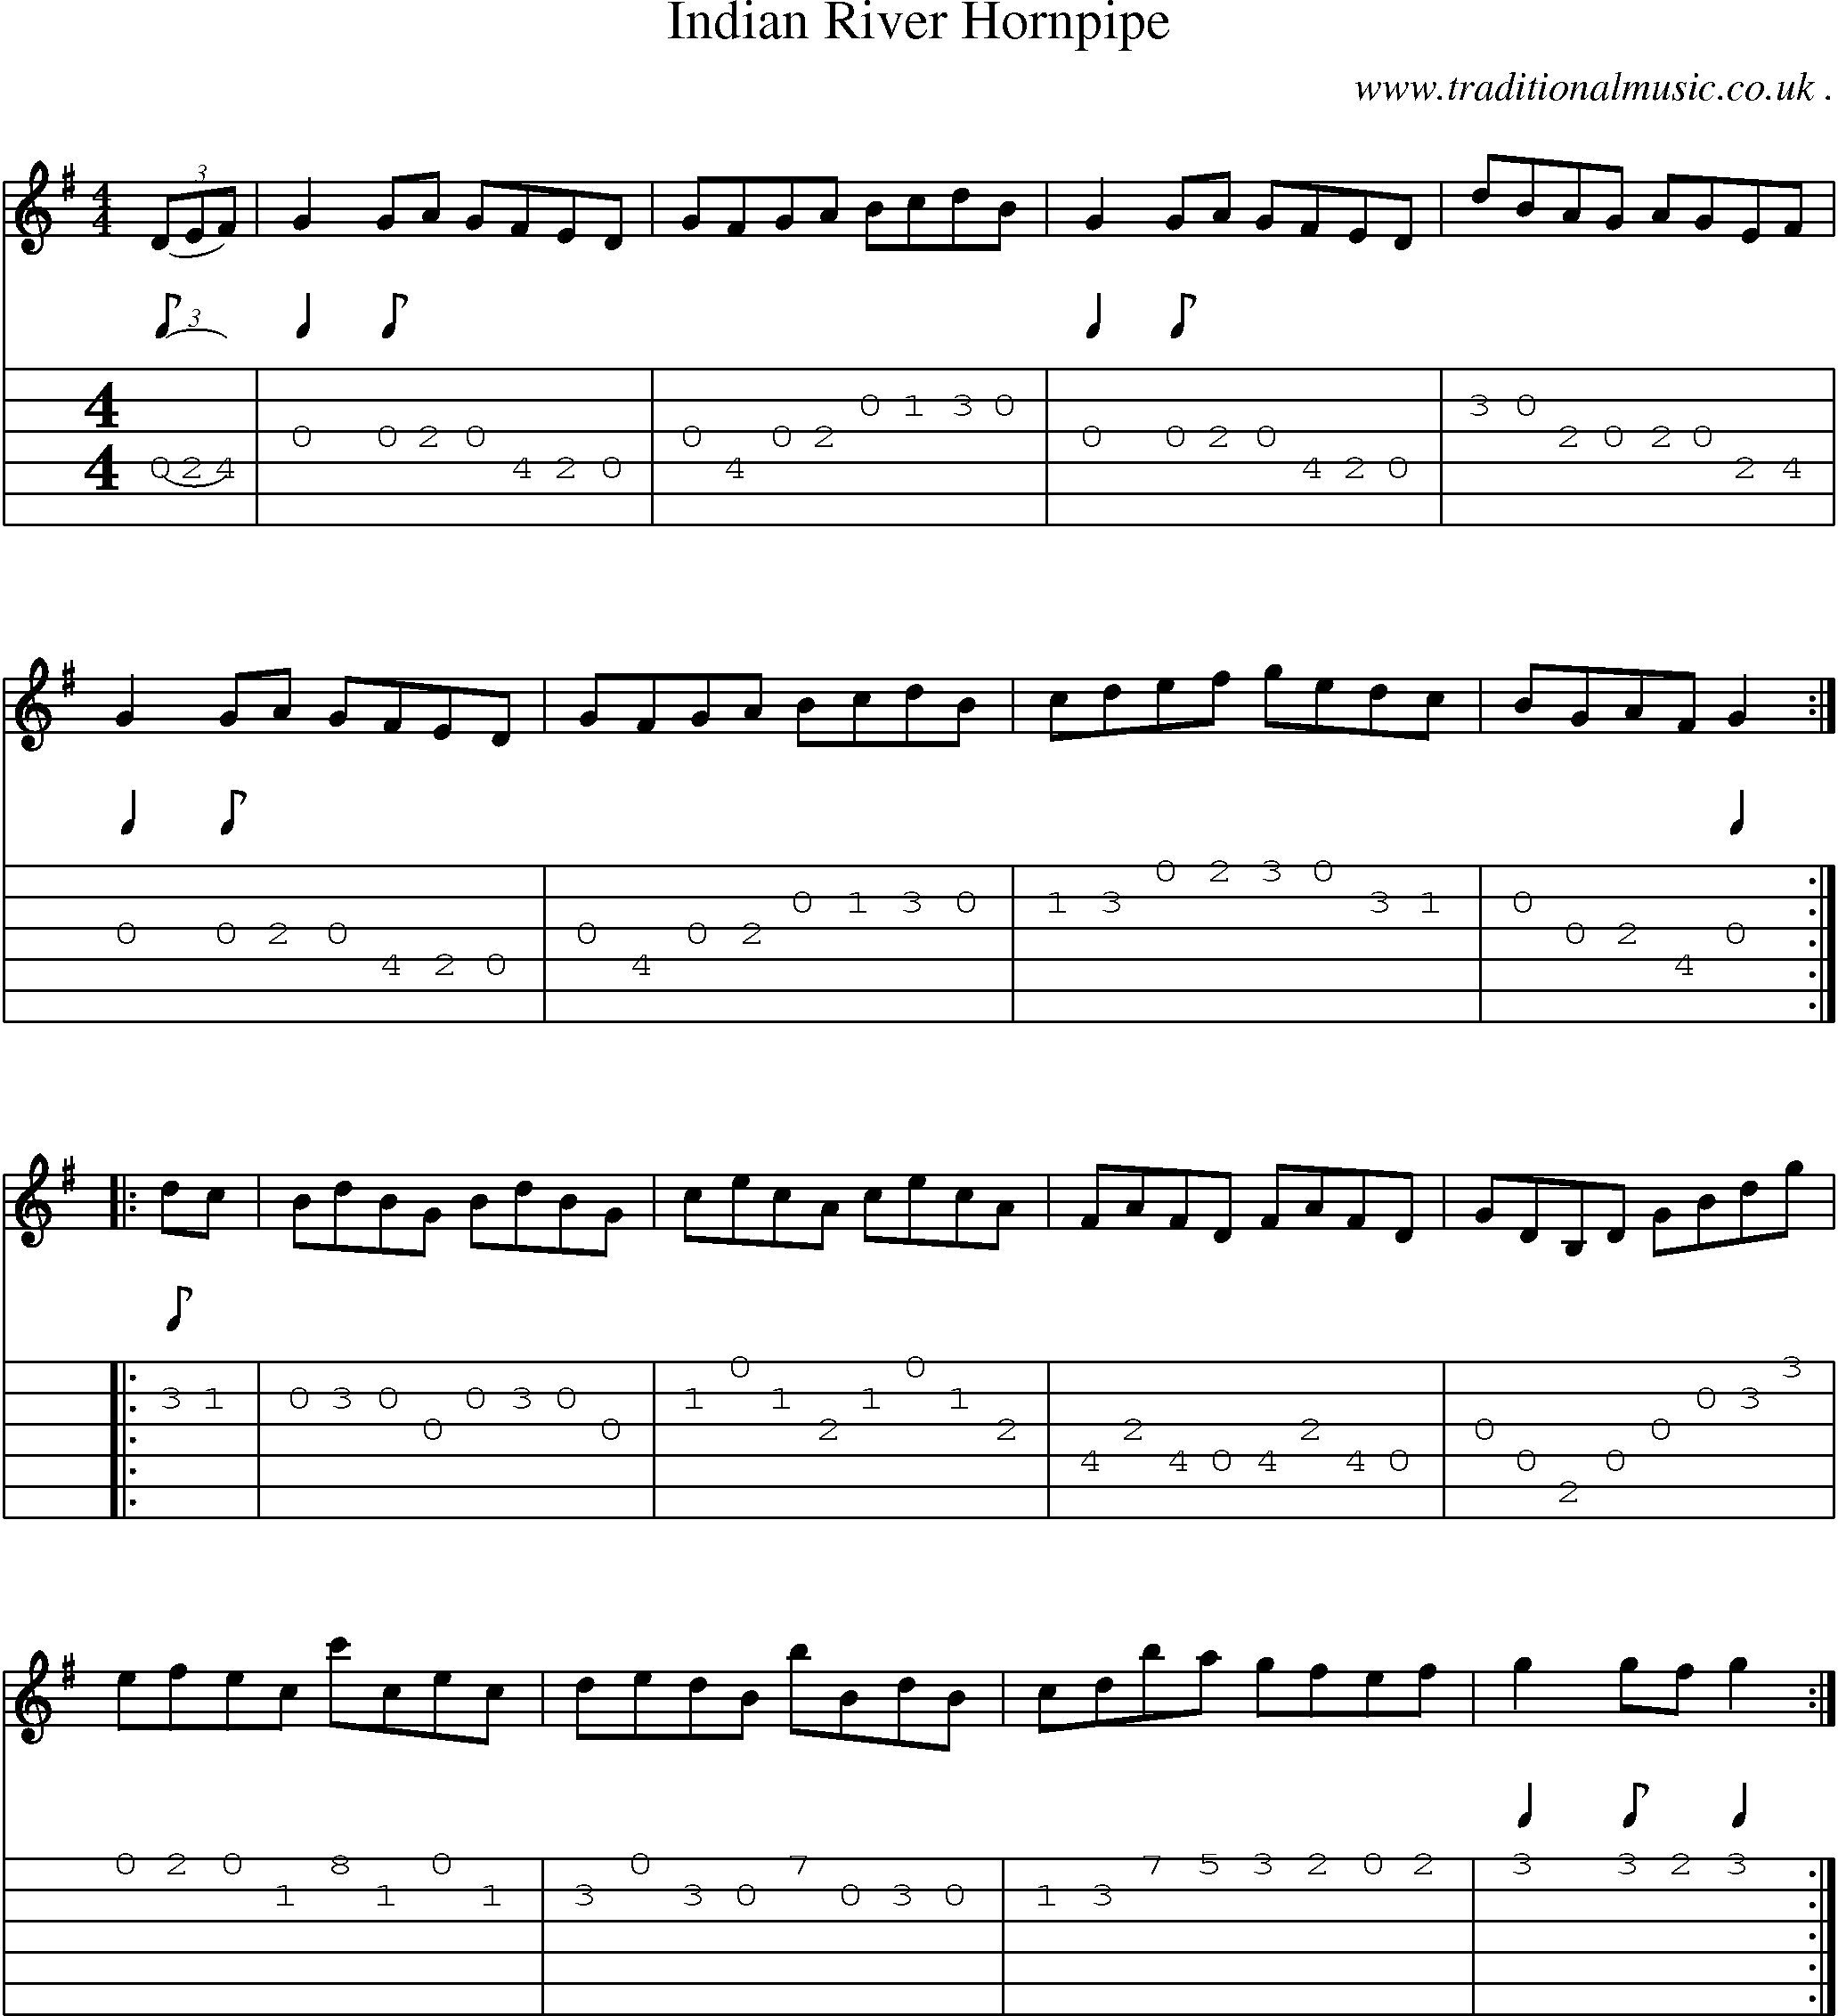 Music Score and Guitar Tabs for Indian River Hornpipe